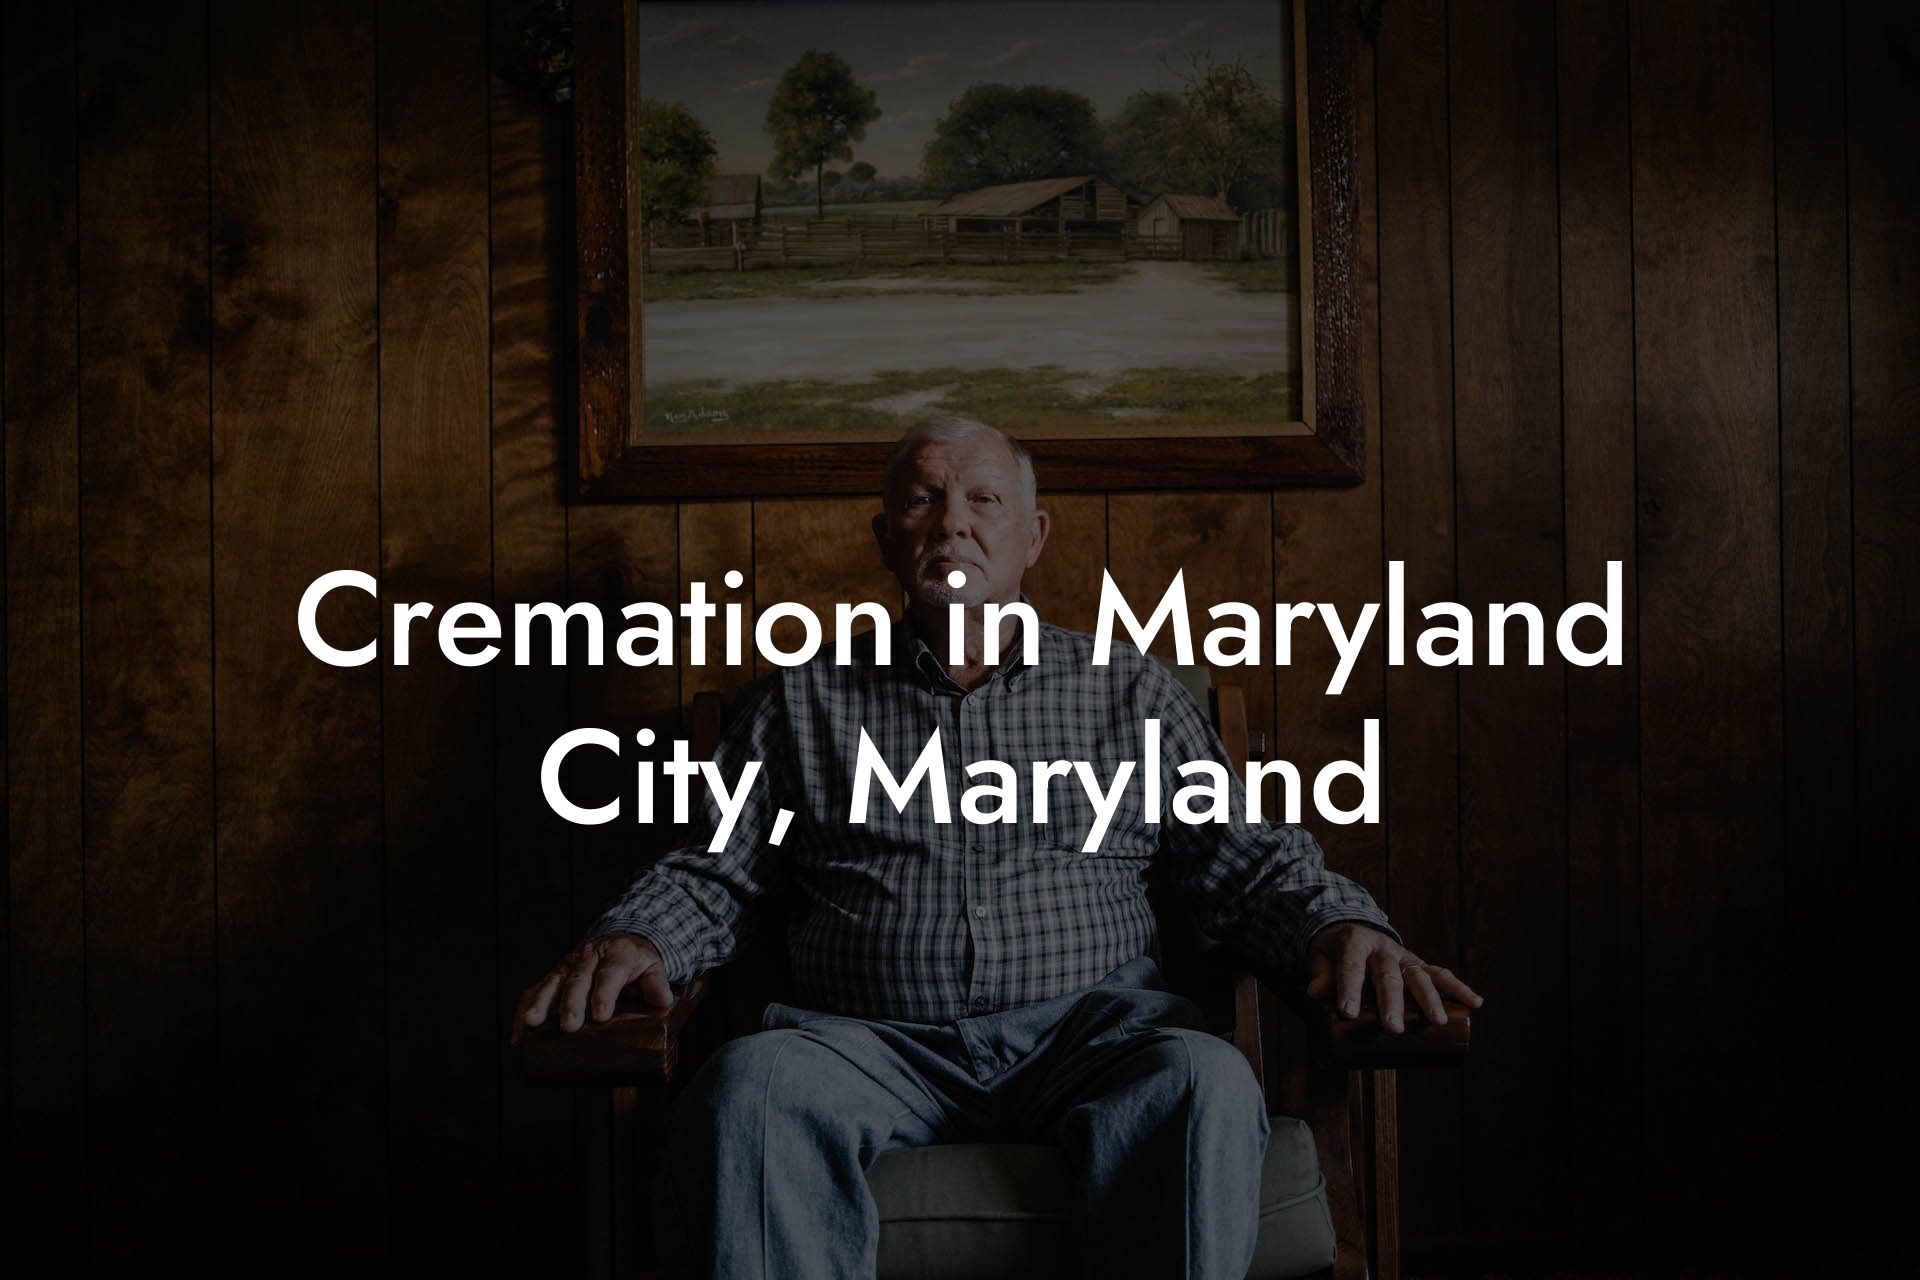 Cremation in Maryland City, Maryland